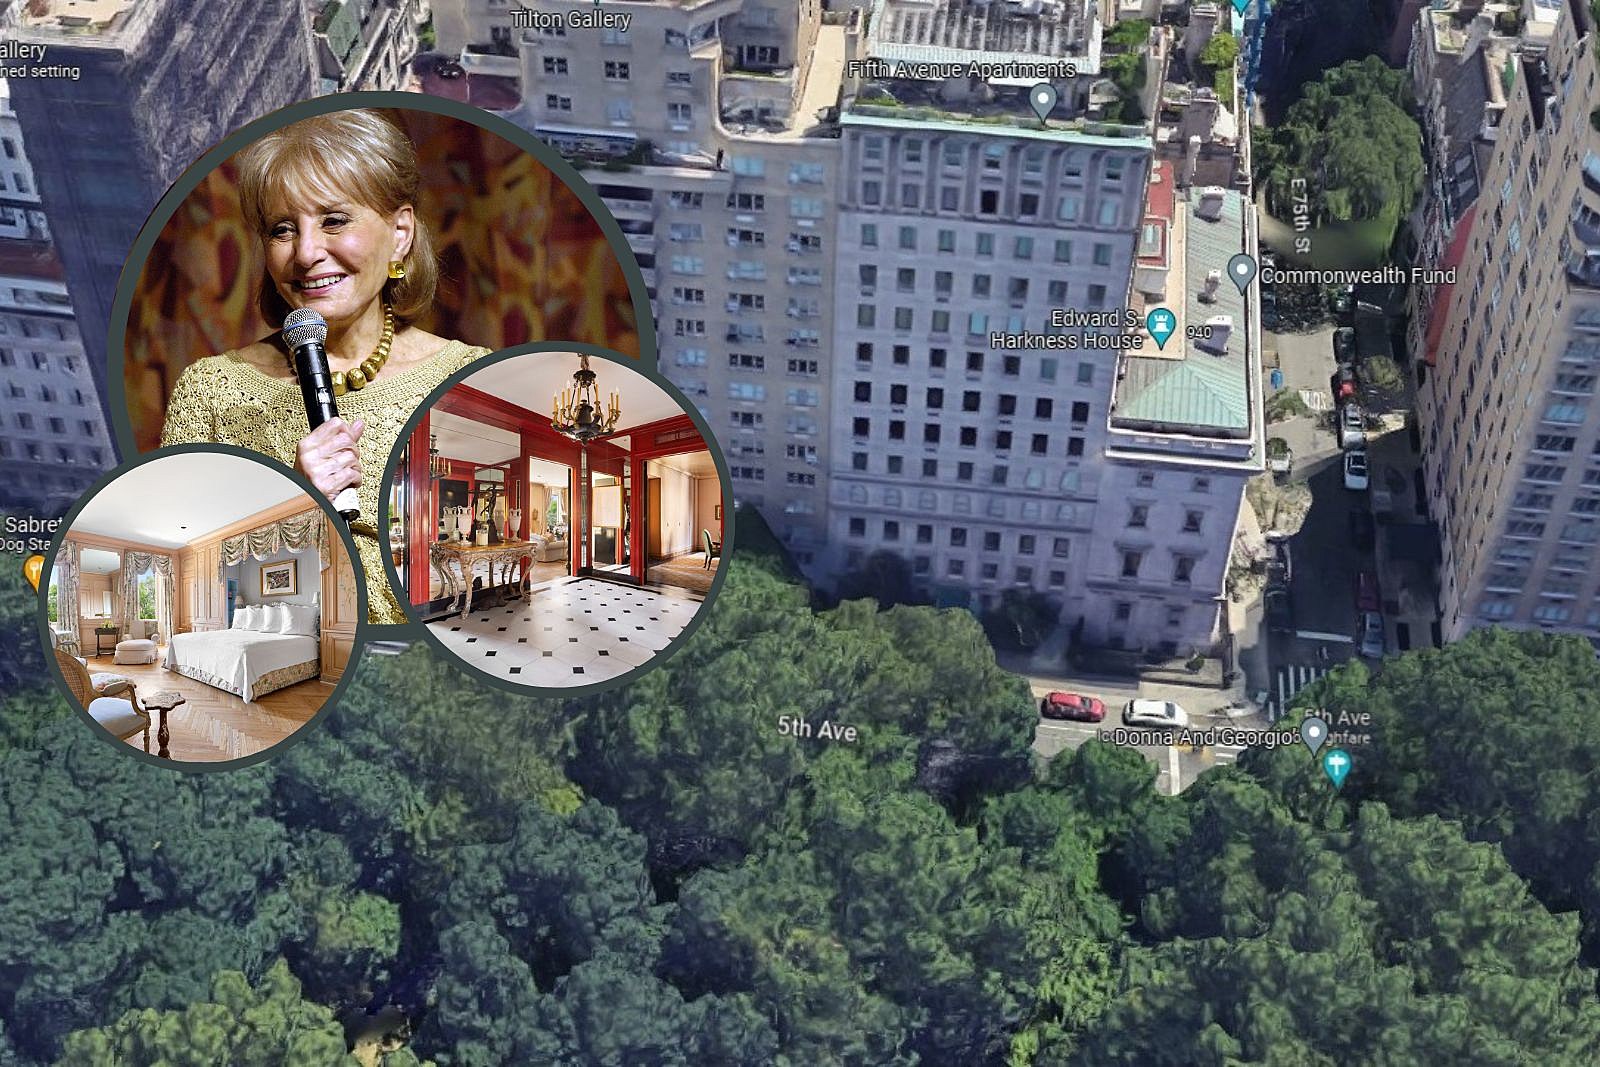 Estate of Bostons Barbara Walters Selling Her Chic 5th Ave Home image